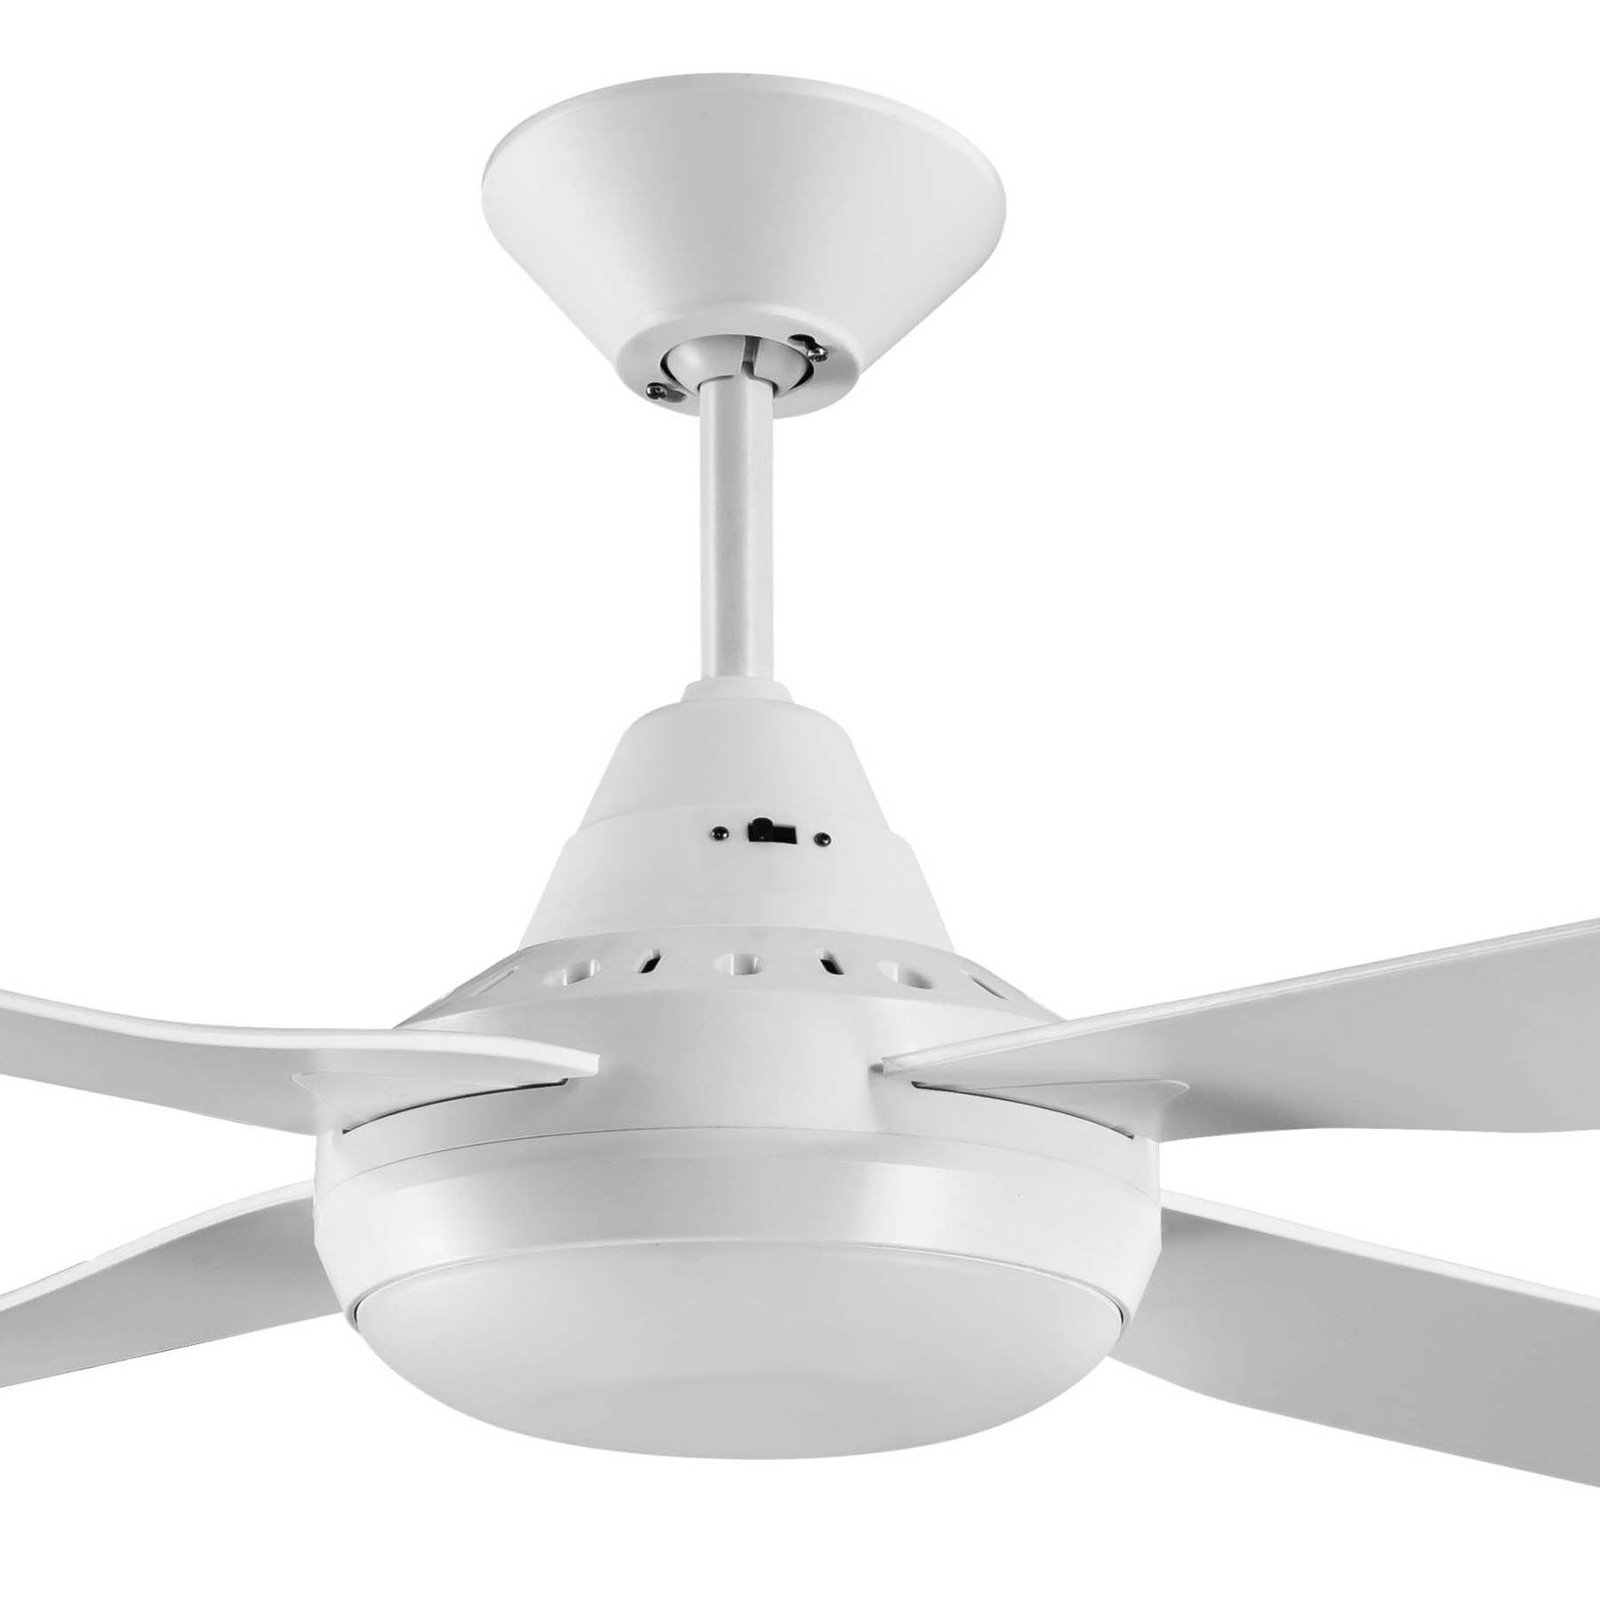 Beacon ceiling fan with light Moonah, white, quiet